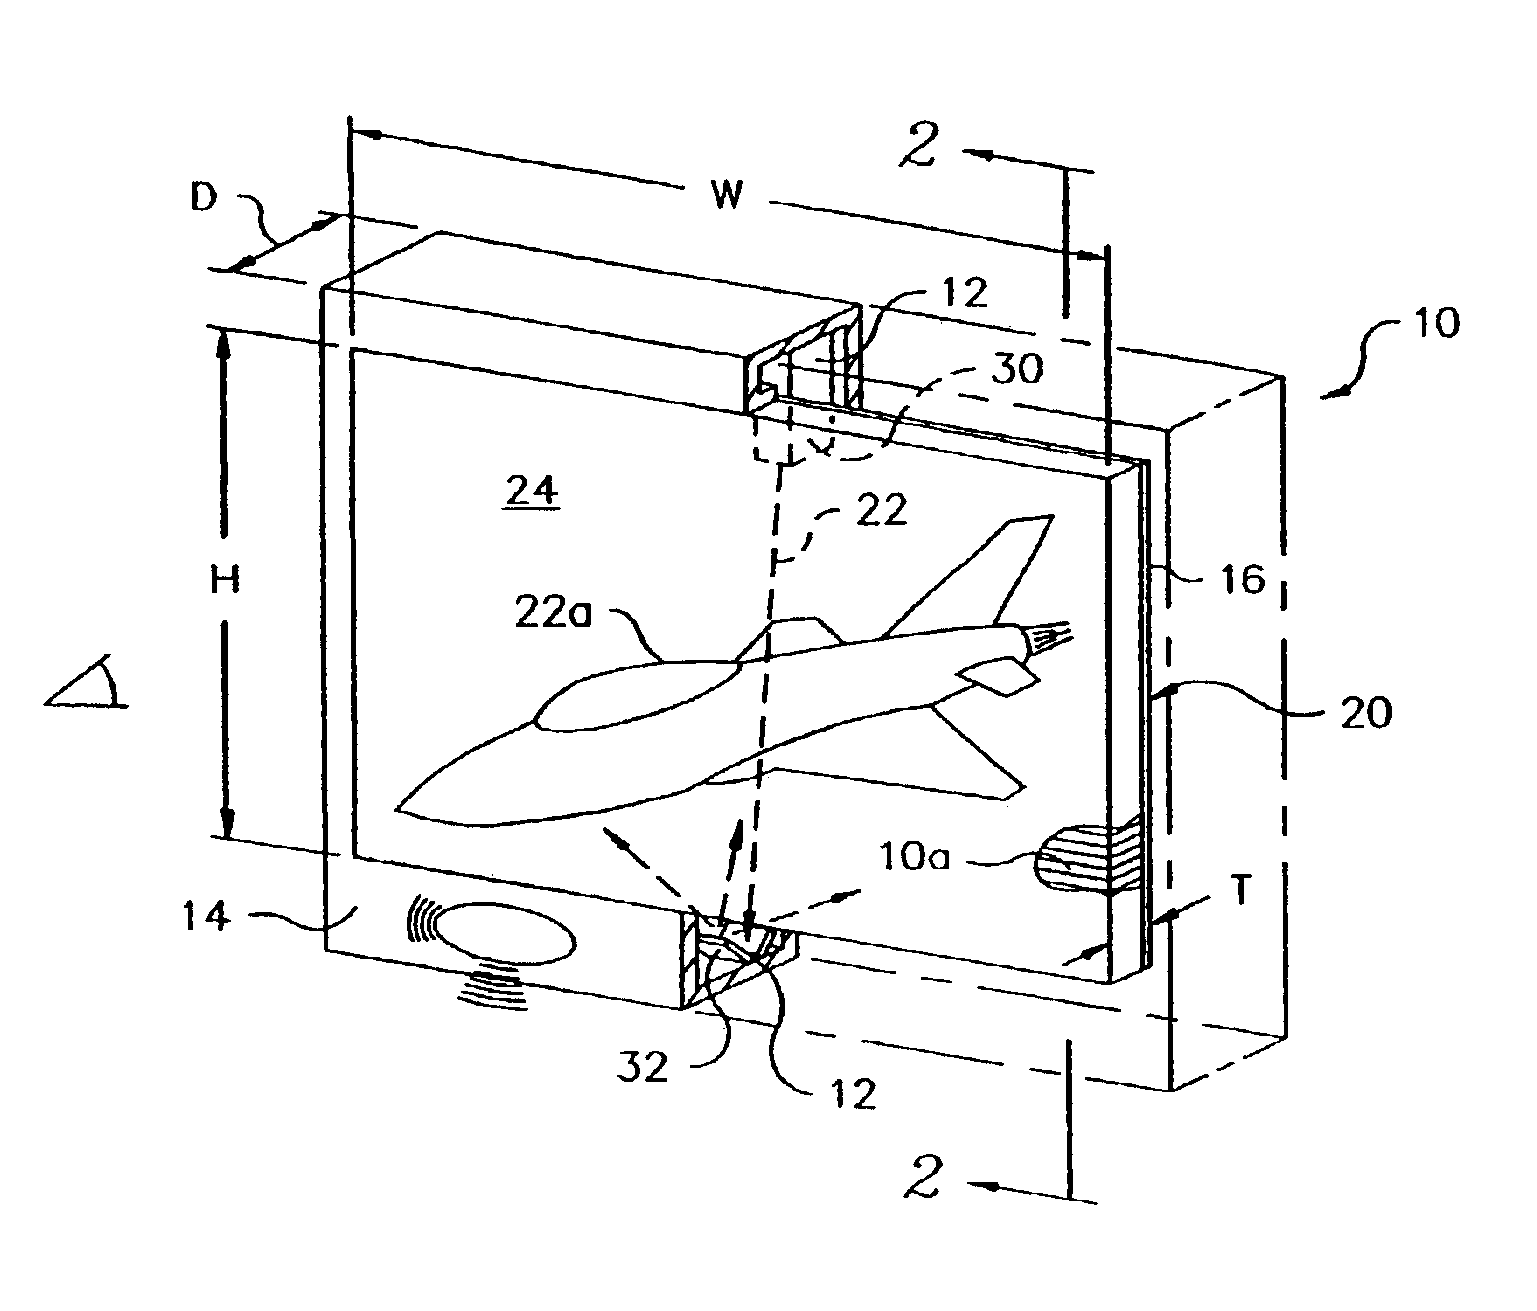 Ultrathin optical panel and a method of making an ultrathin optical panel